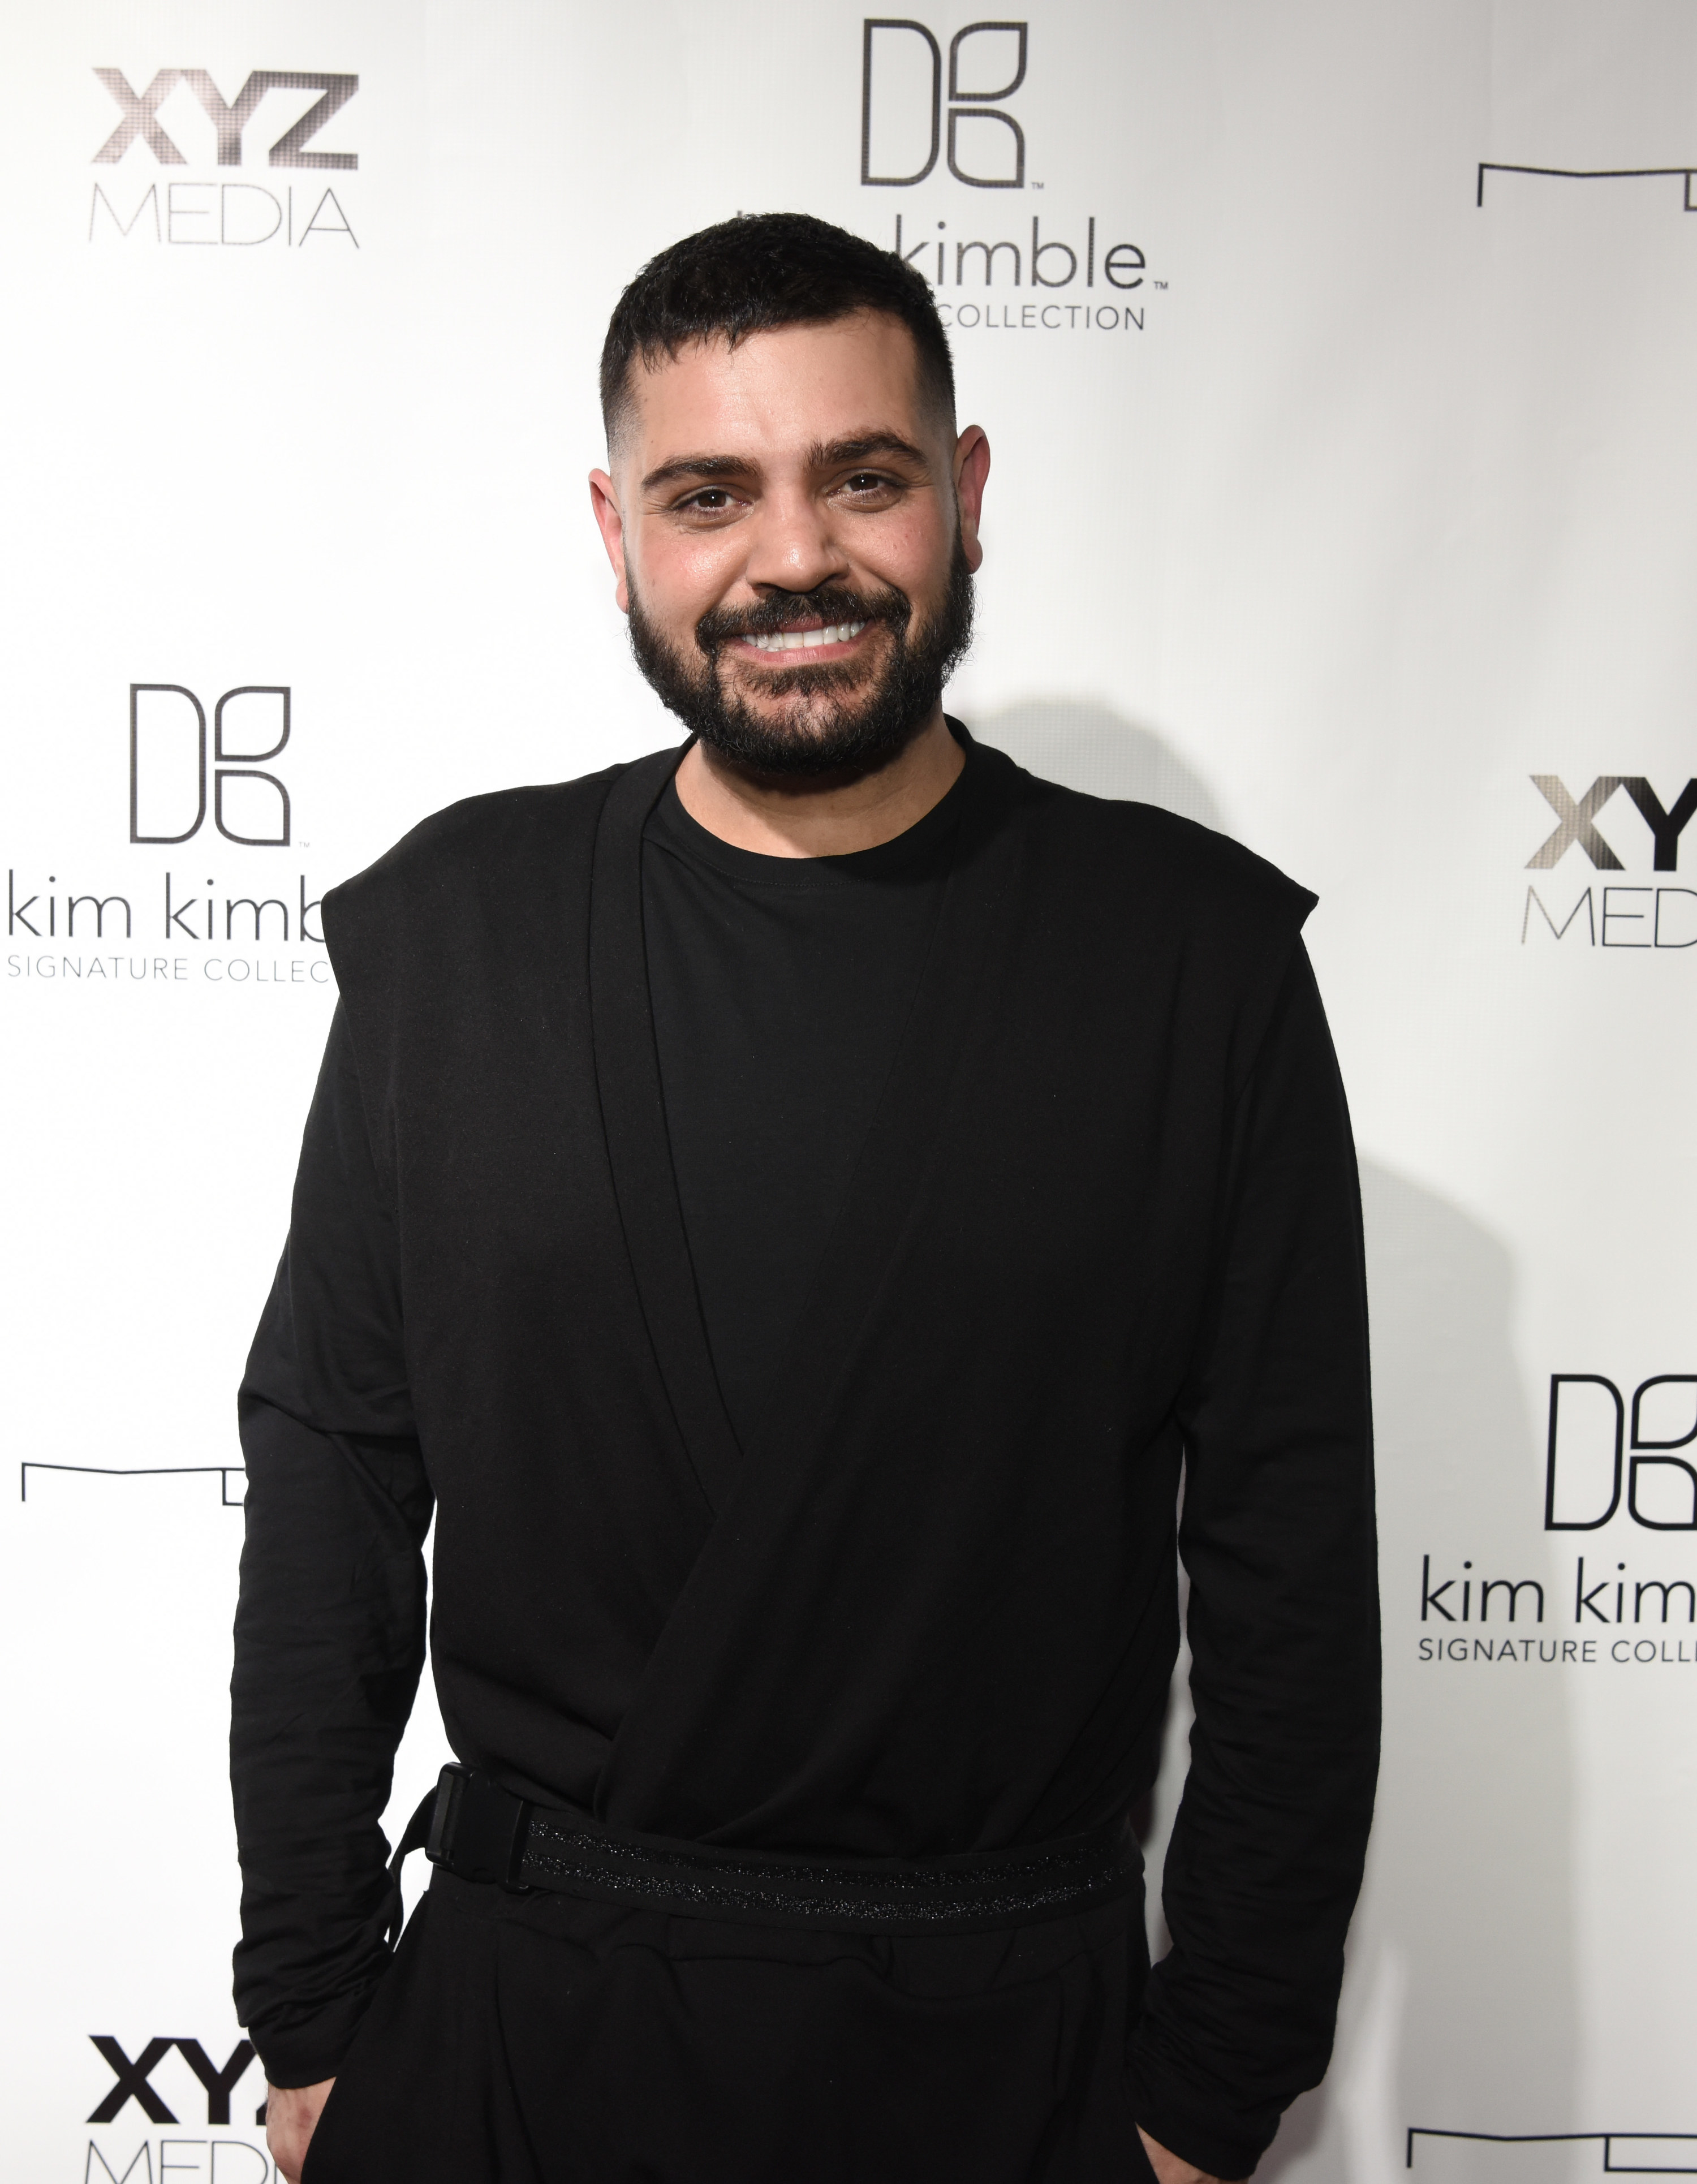 Michael Costello, with hands in pocket, stands on the red carpet